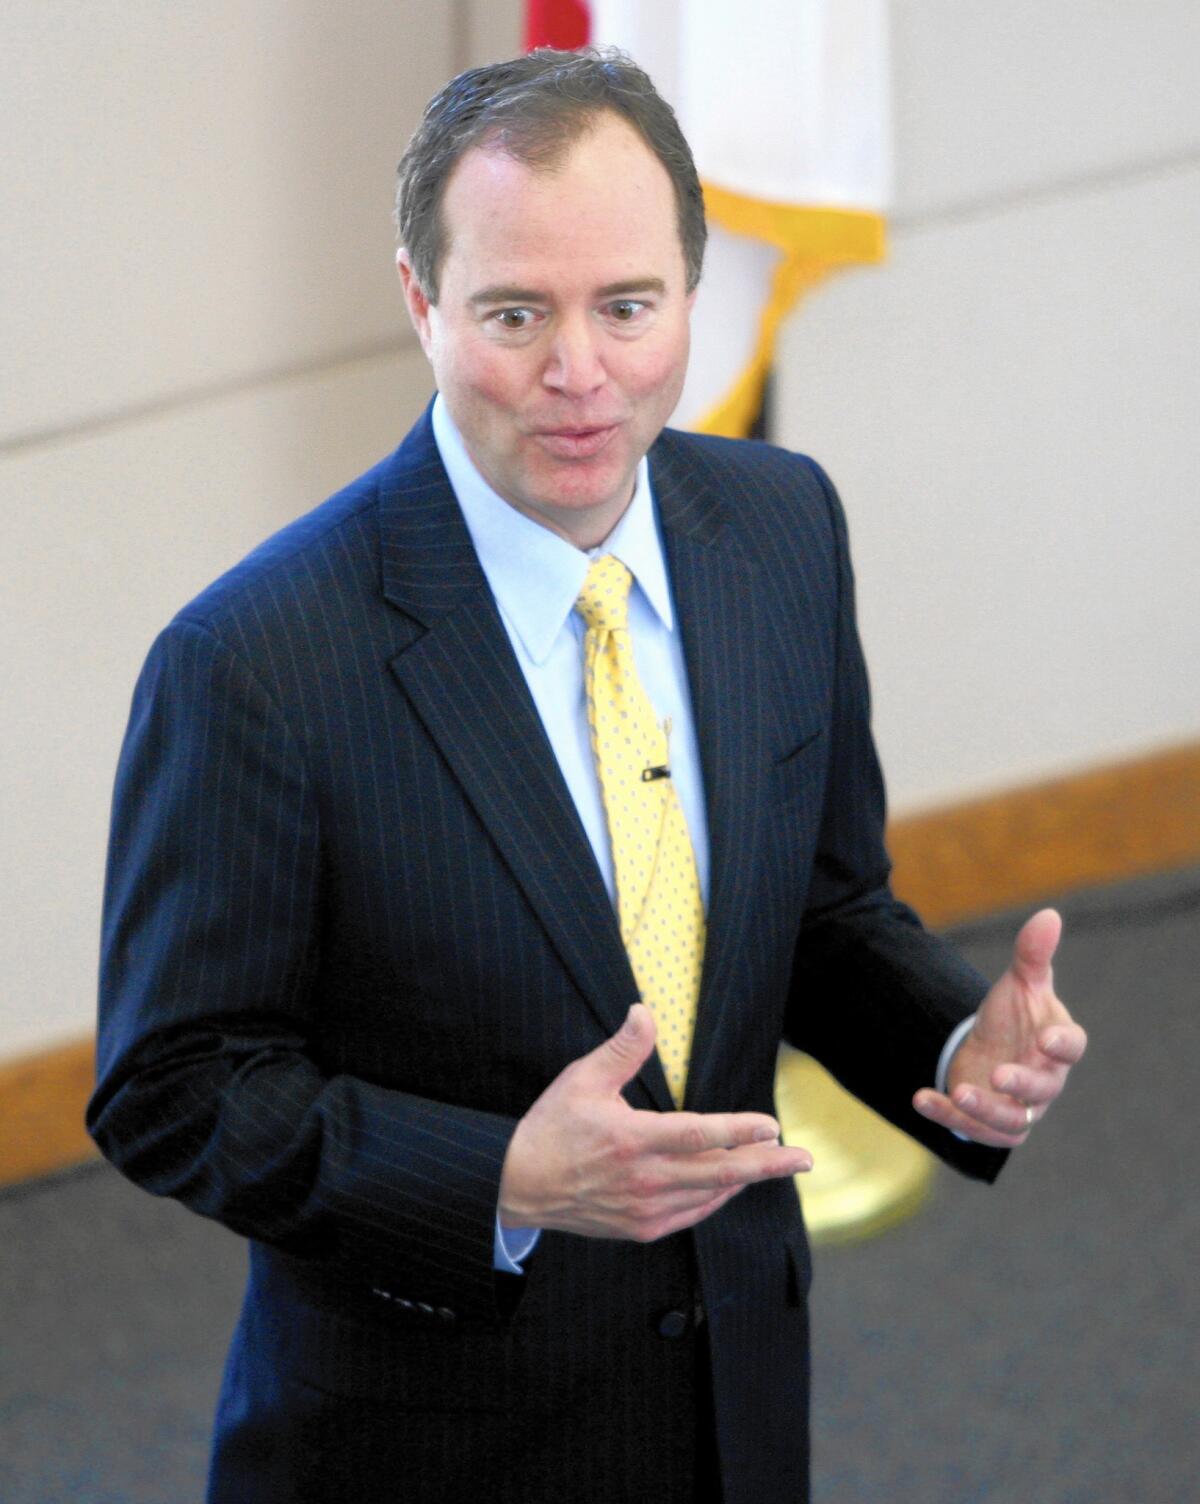 Rep. Adam Schiff (D-Burbank) speaks to students at Burbank High School in Burbank on Friday, March 20, 2015. Schiff announced Tuesday that he had nominated 14 students from the 28th Congressional District to U.S. service academies for the class of 2020.